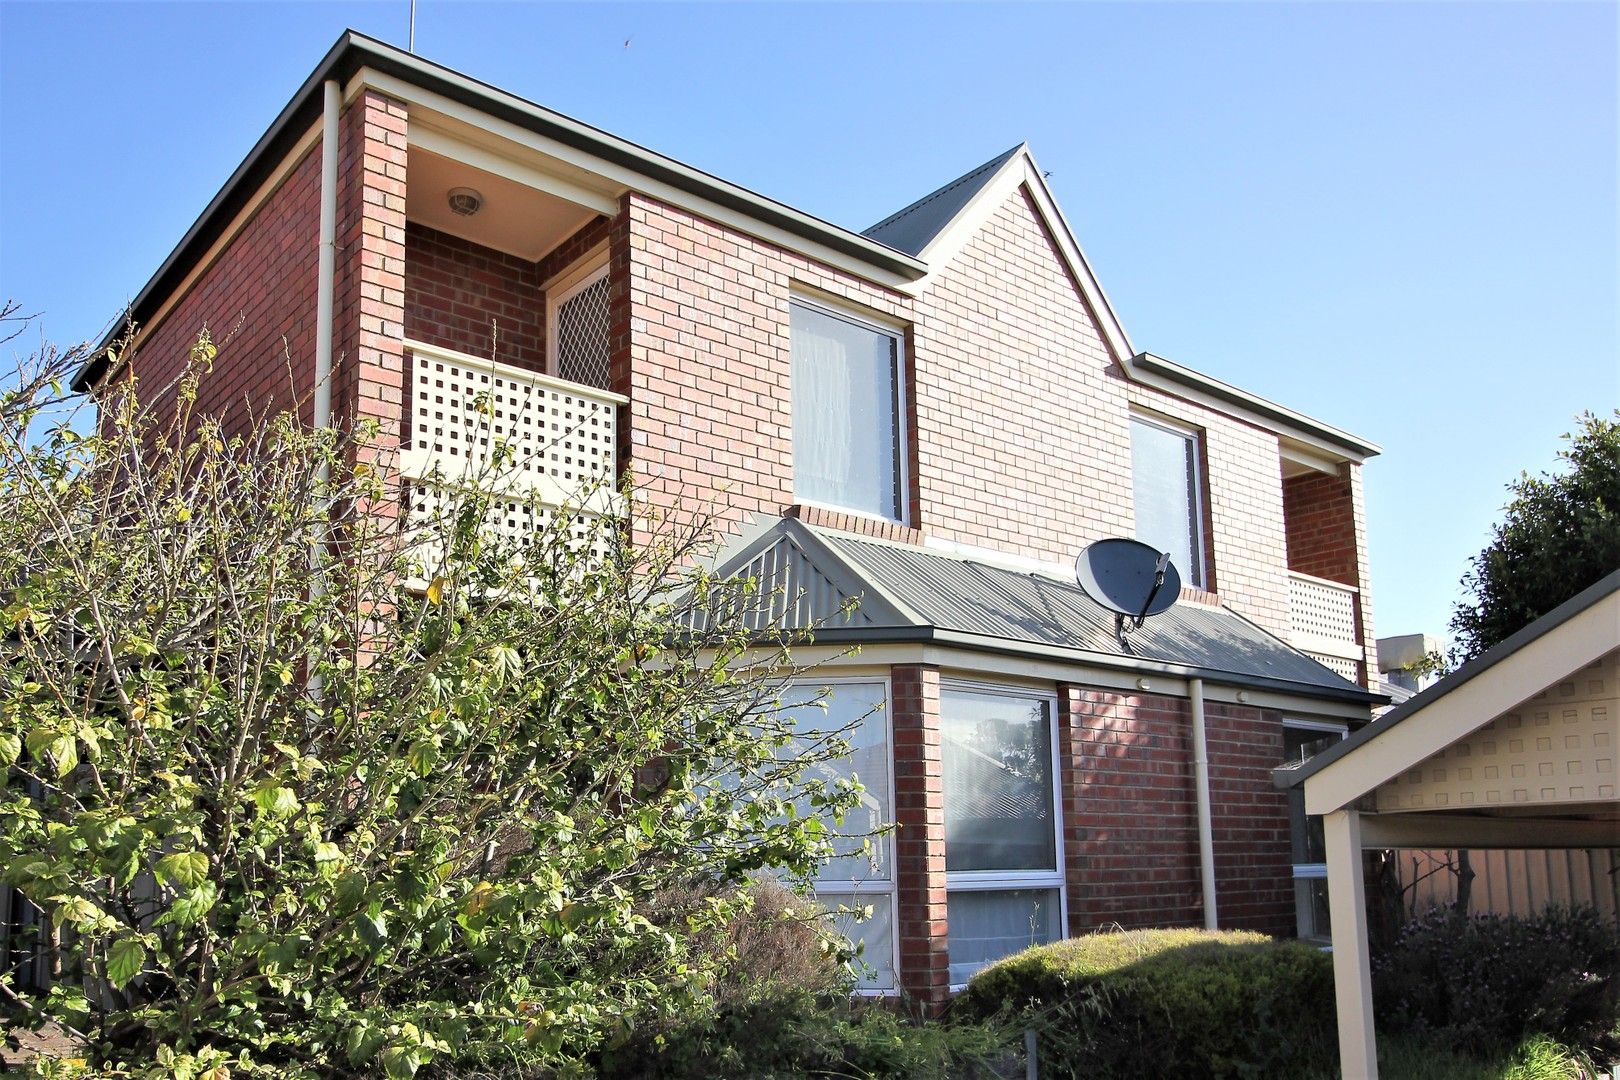 2 bedrooms Townhouse in 6/42 Shepherds Hill Road BEDFORD PARK SA, 5042